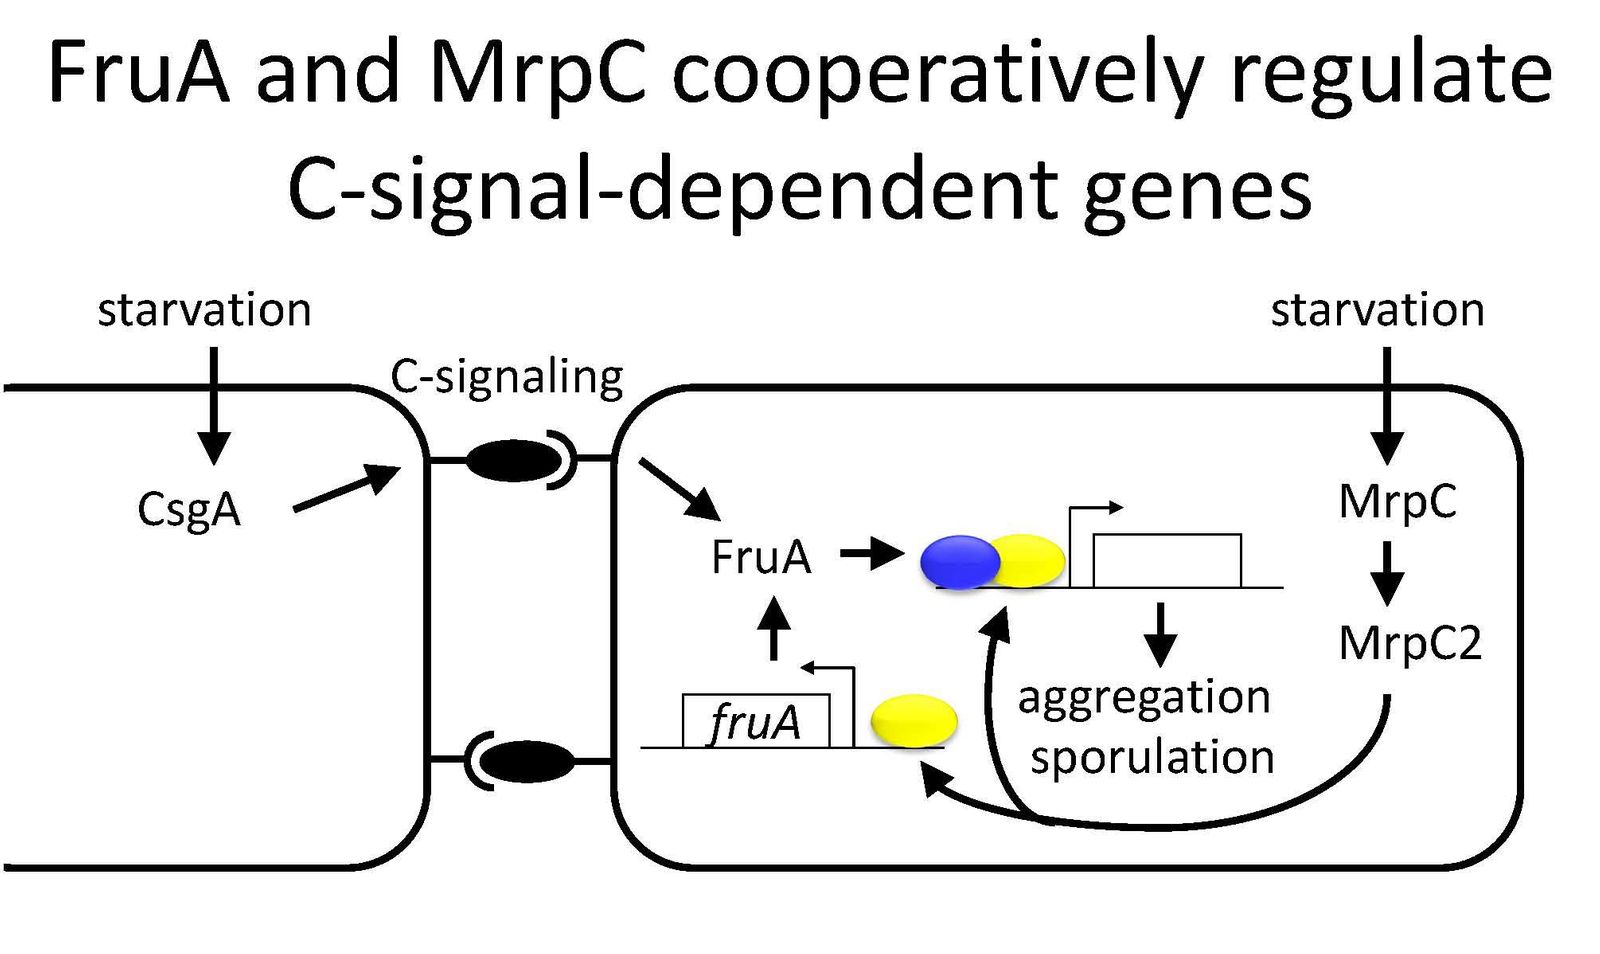 Fig. 5. C-signal-dependent gene regulation. Expression of CsgA and MrpC increase in starving M. xanthus cells. CsgA is cleaved by a protease at the cell surface, where it is believed to act as the C-signal, although a receptor has not been identified. C-signaling requires close proximity (possibly contact) between cells and leads to activation of FruA, which is produced in response to MrpC2. Activated FruA and MrpC2 bind cooperatively to promoter regions of genes involved in aggregation and sporulation. MrpC2 is derived from MrpC by proteolytic cleavage. MrpC binds to the endoribonuclease toxin MazF, preventing programmed cell death in a minority of the cells, which form spores.